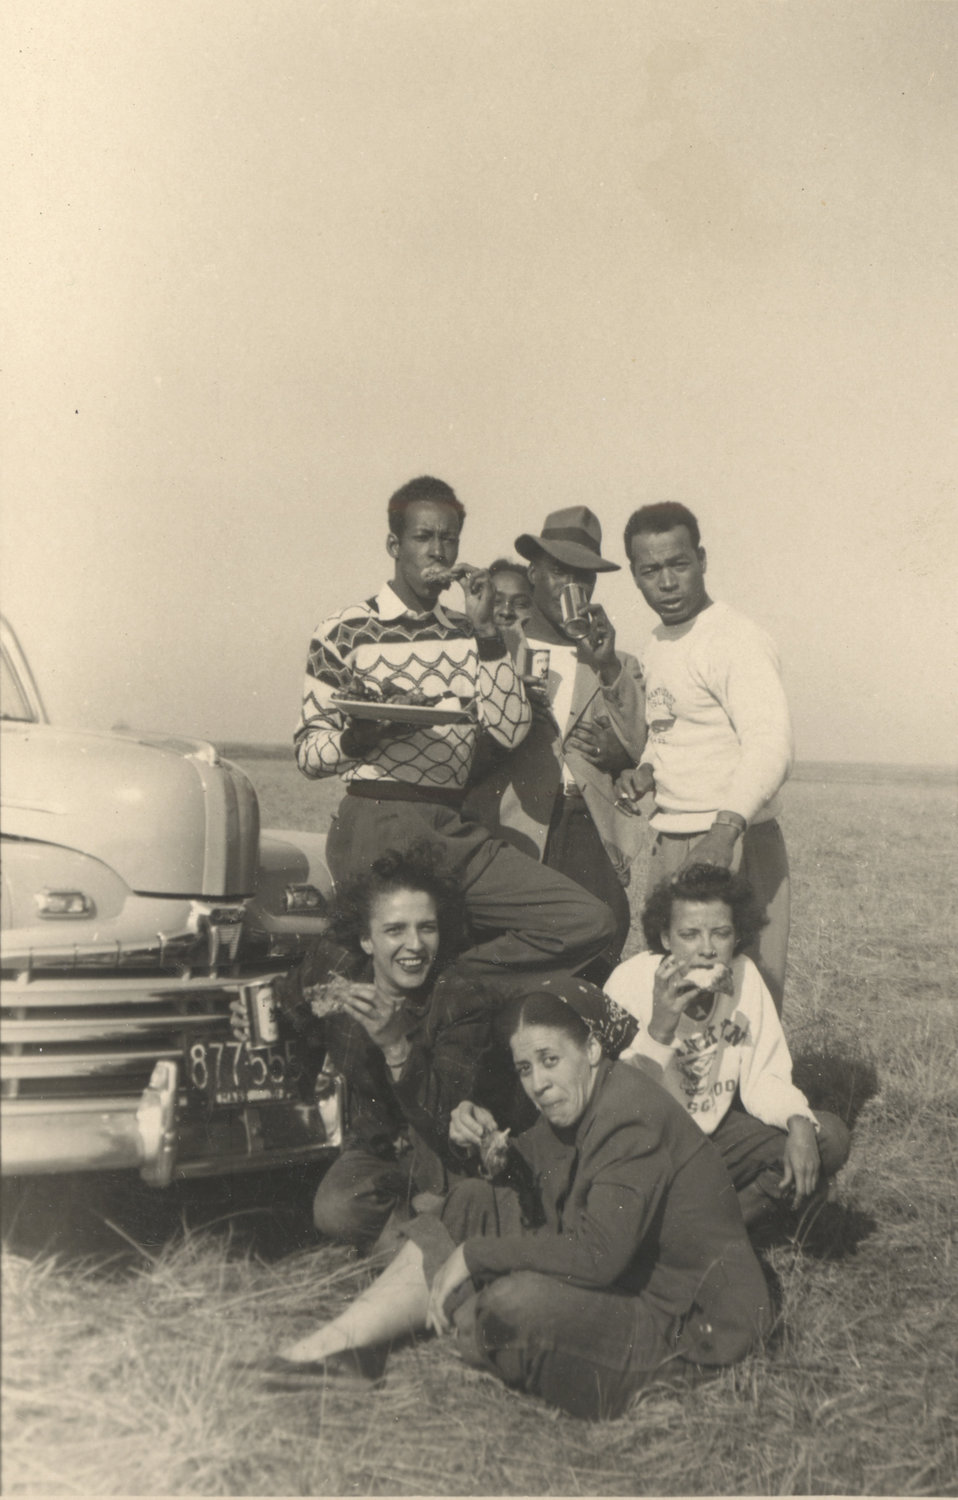 Isabel Barrows, Frankie White and Jean Montaro Wall among a group of Cape Verdeans having a picnic at the beach in the 1950s.